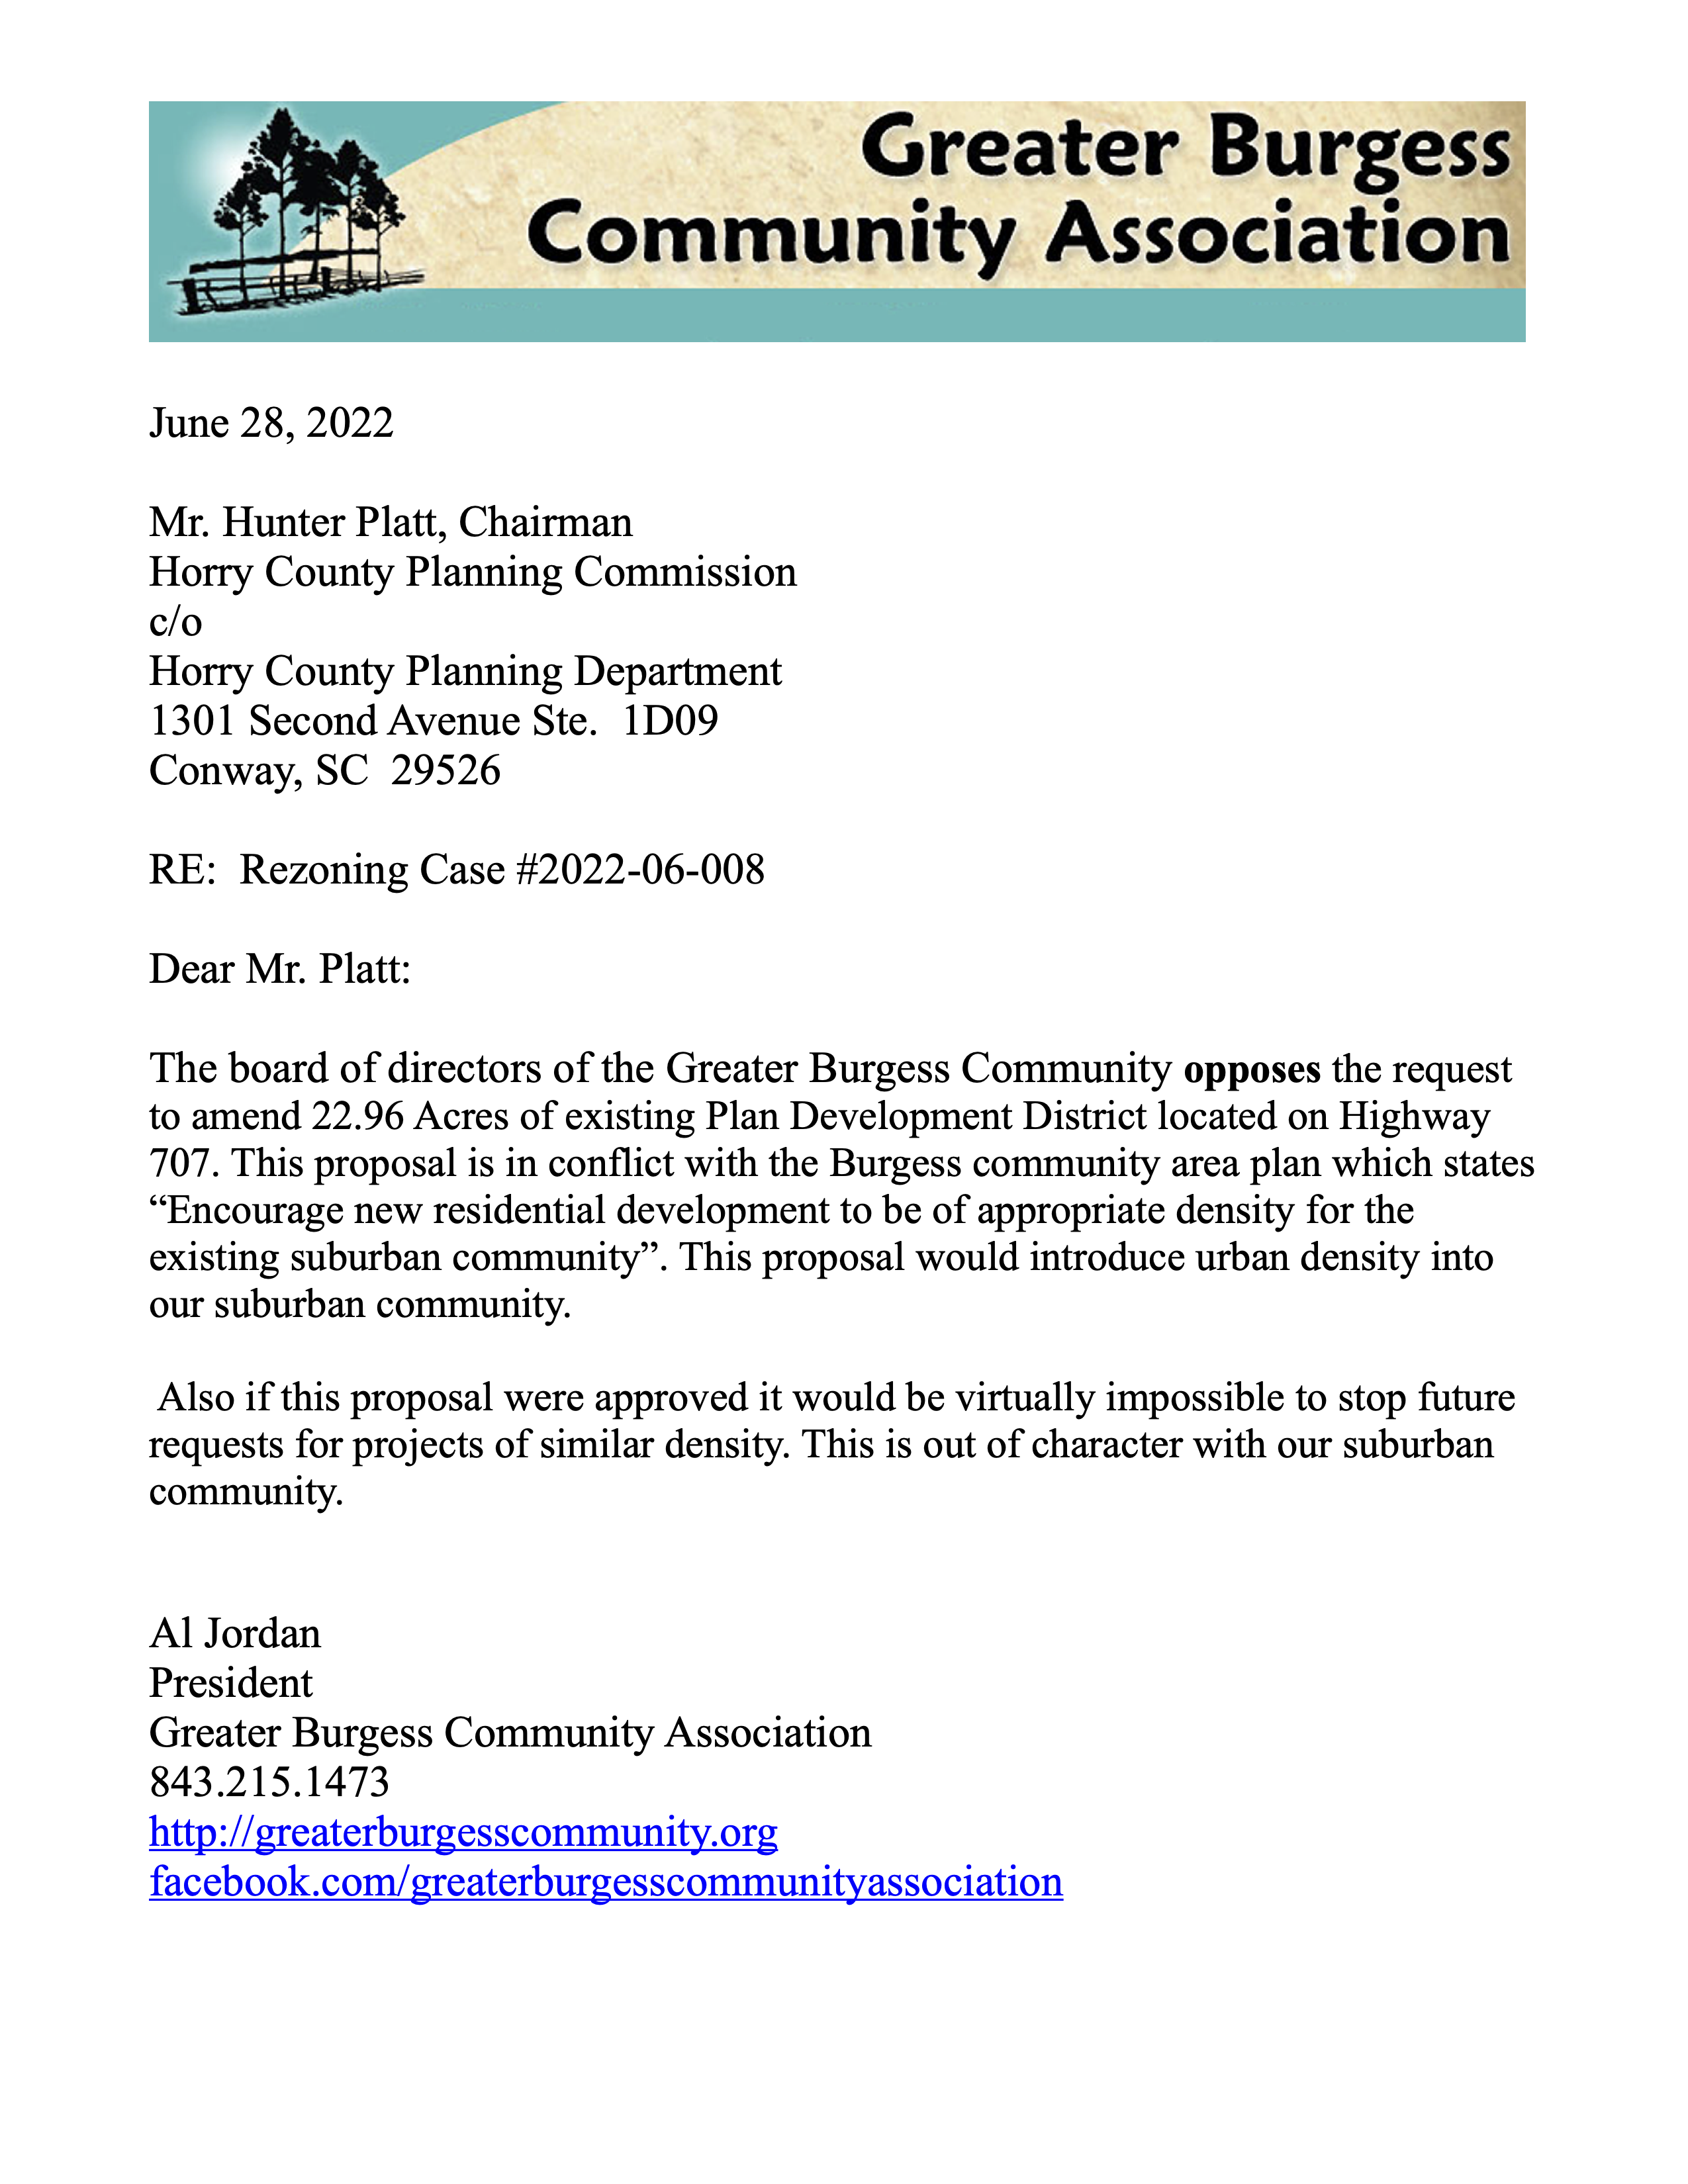 Letter to Planning Commission on ammending PDD on Hwy 707 6 28 2022